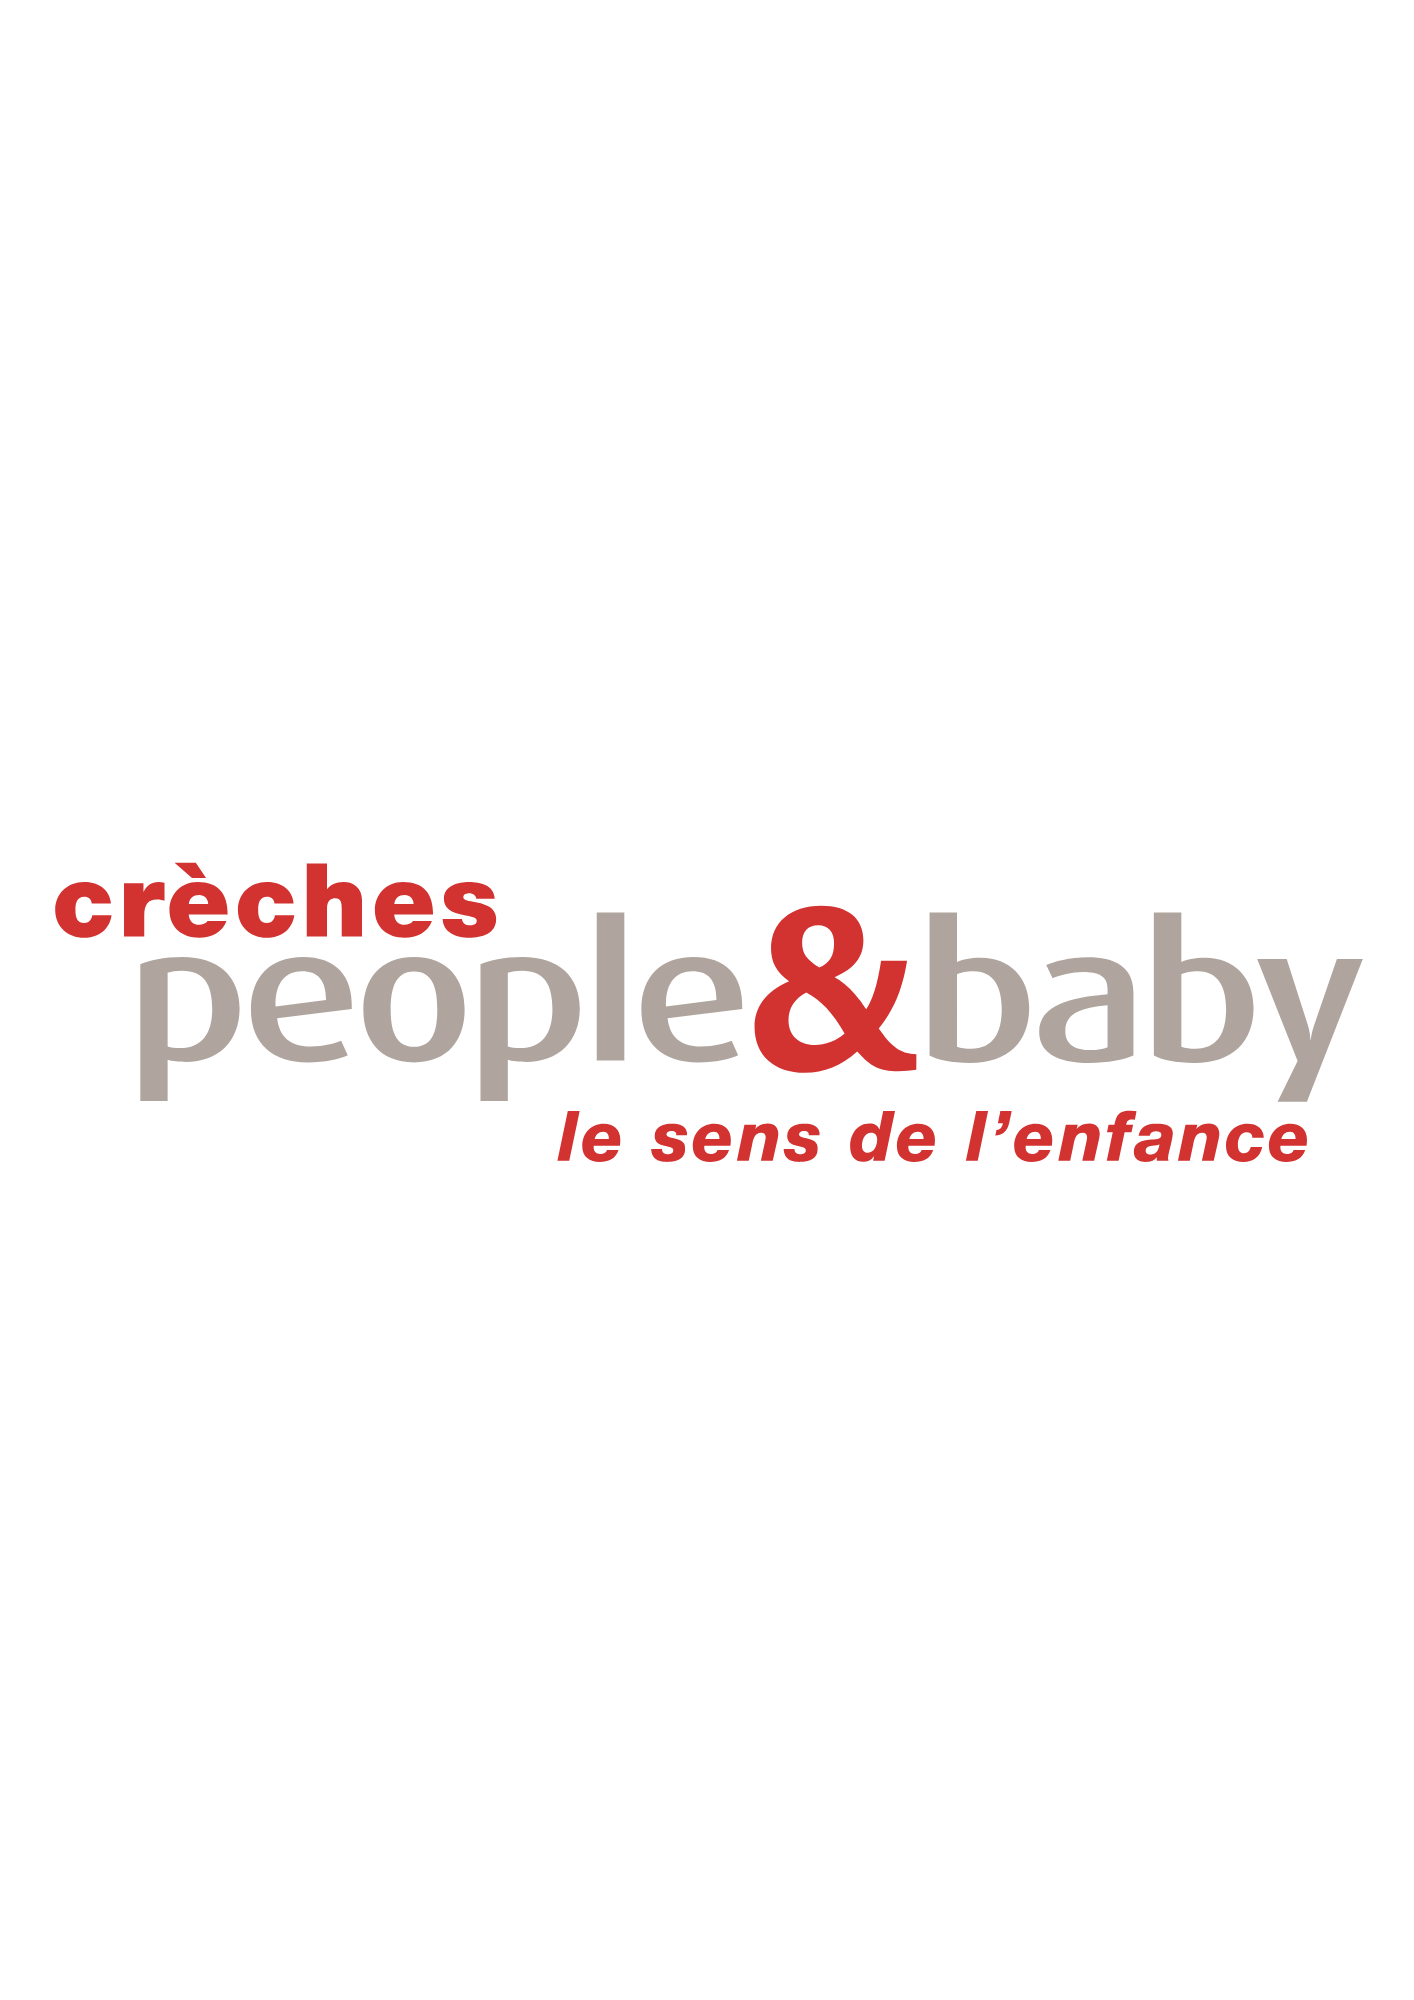 https://www.people-and-baby.com/creches